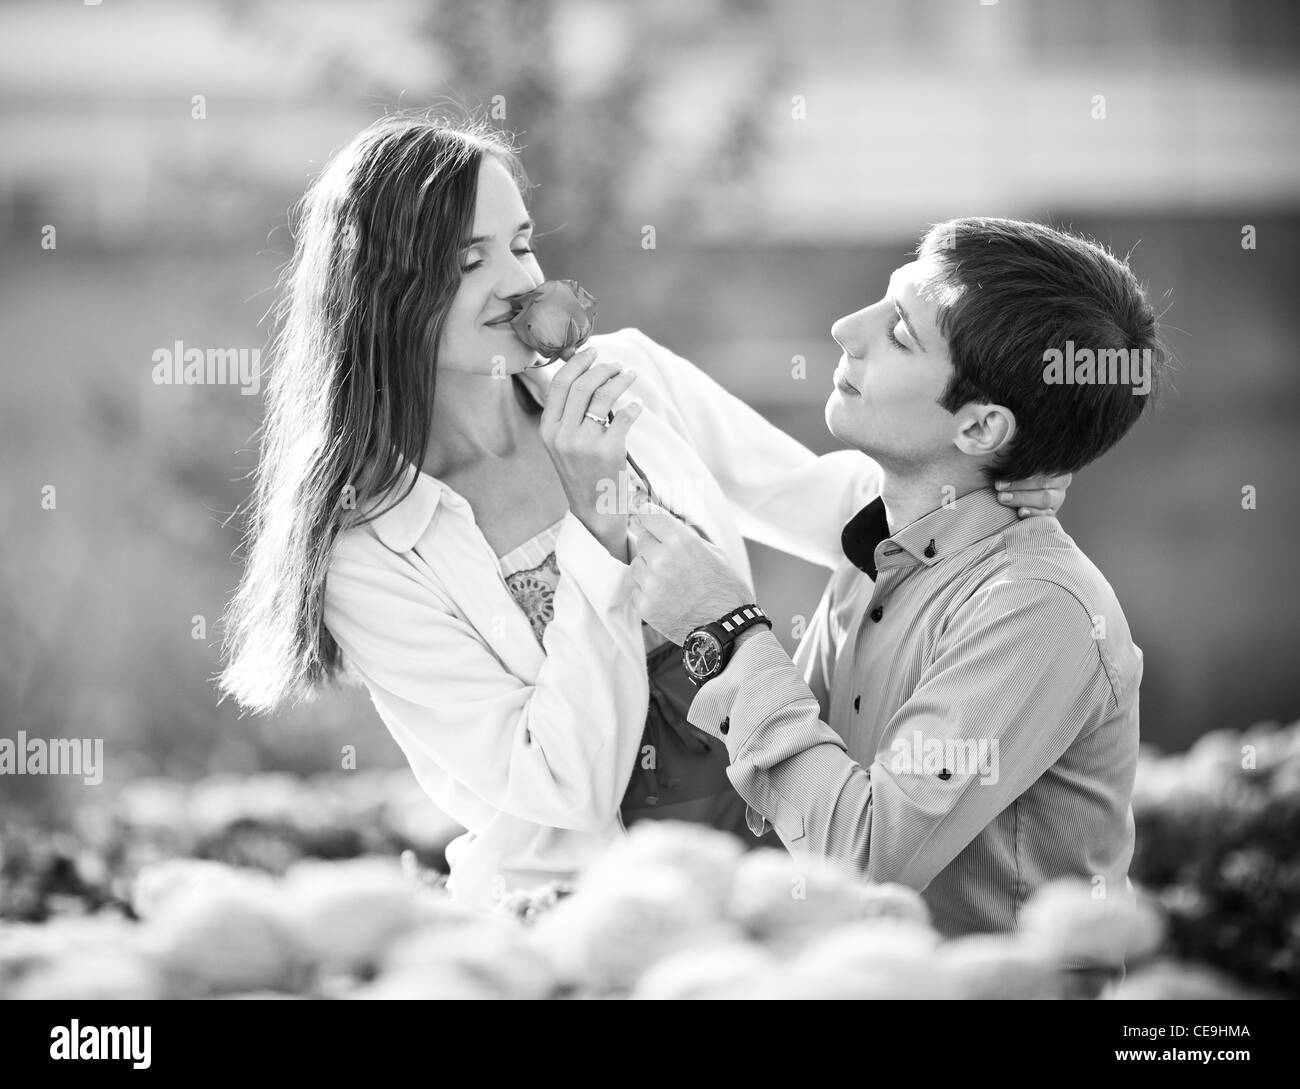 black and white image of a happy romantic young couple spending time outdoor in the autumn park (focus on the man) Stock Photo